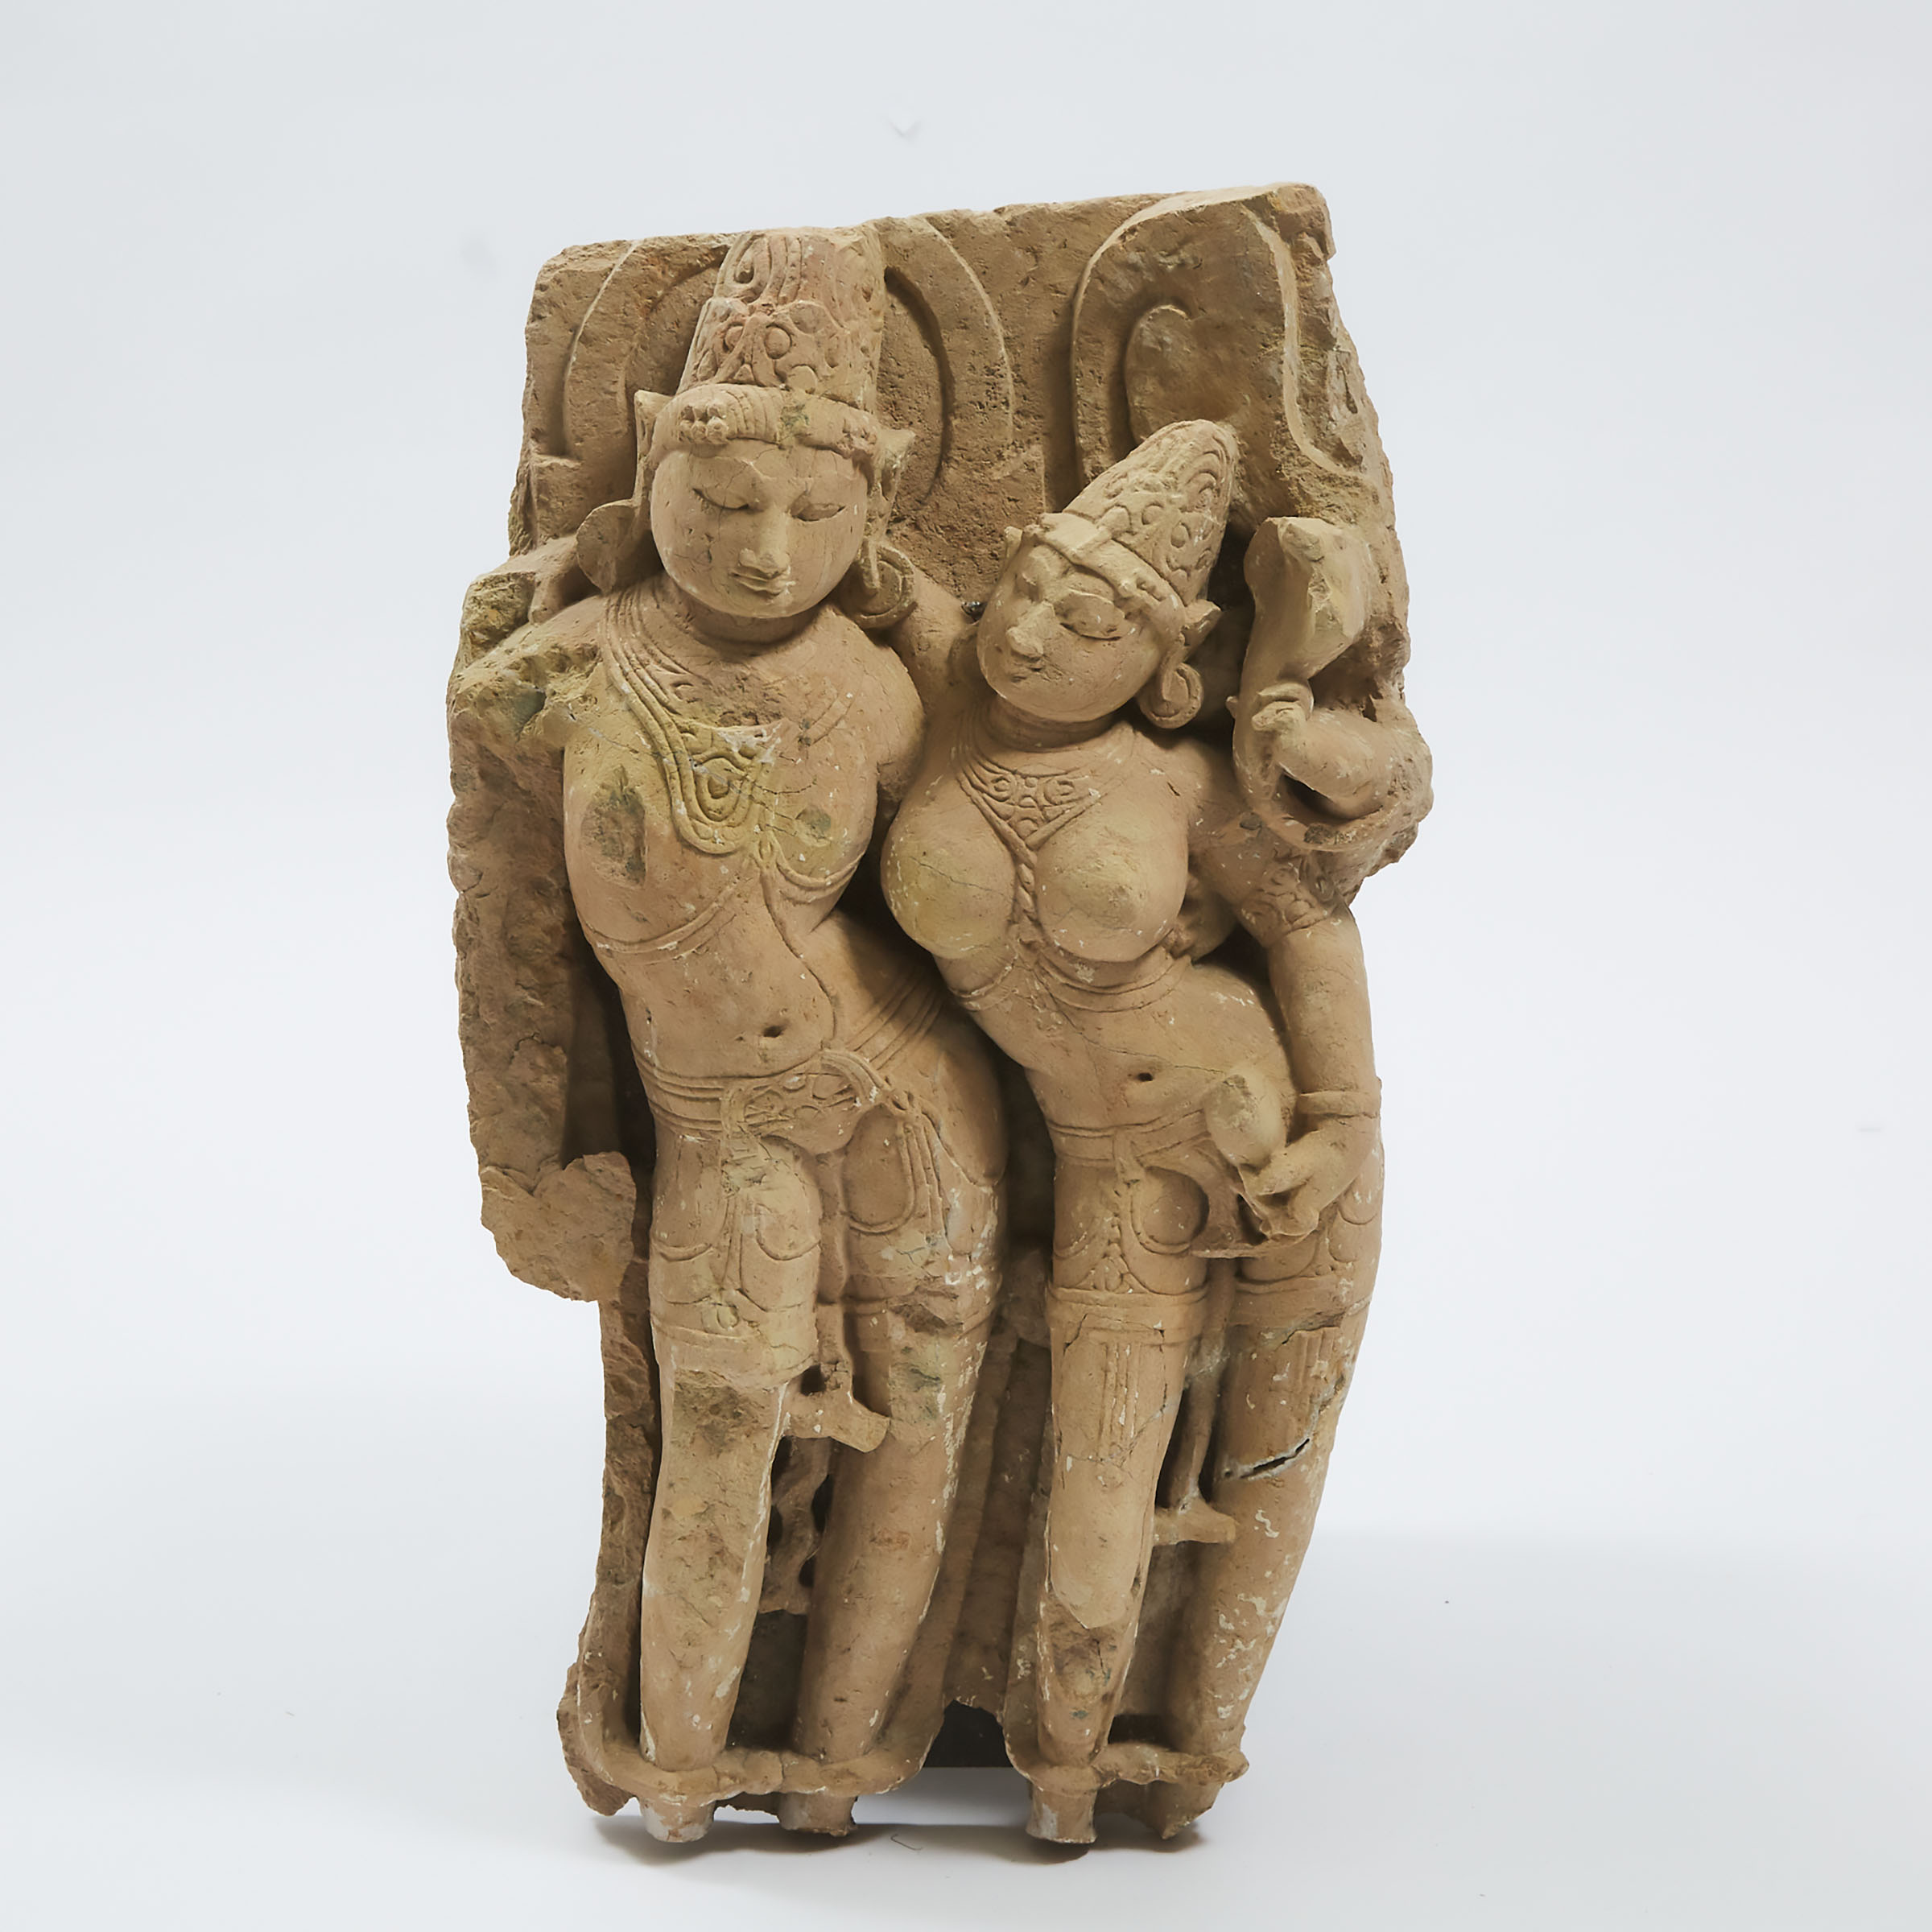 A Large Indian Stone Carving of a Pair of Male and Female Deities, 12th Century or Later